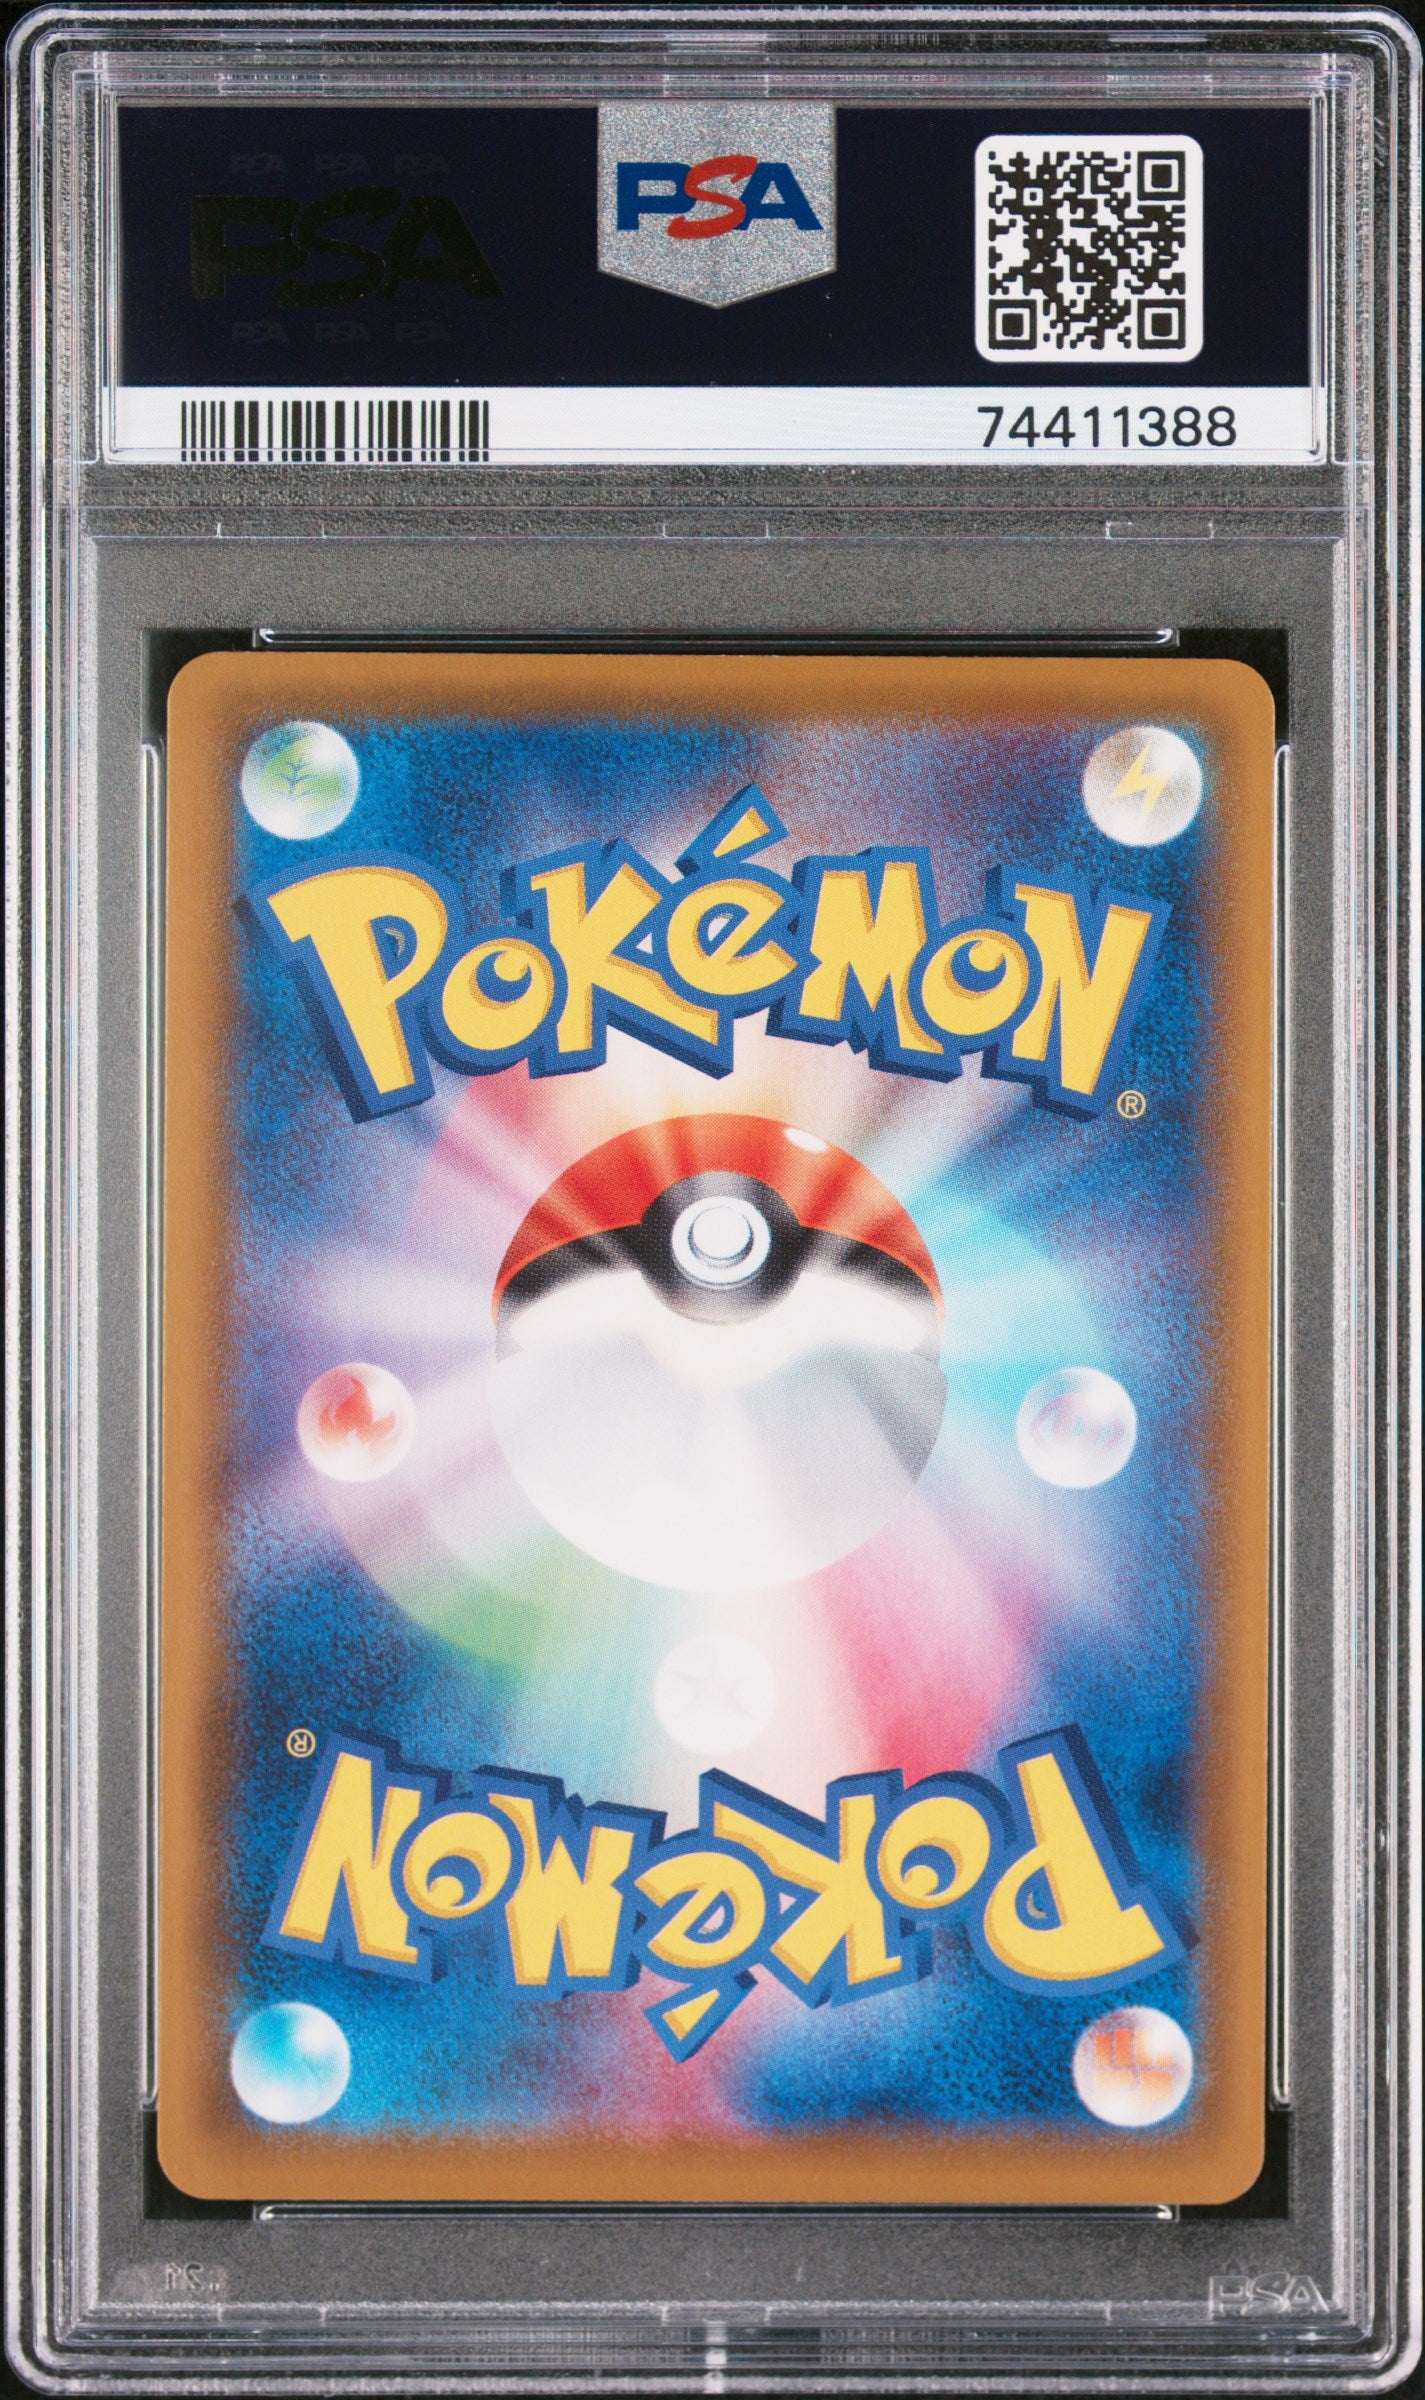 PSA 9 - Glaceon V 076/069 s6a Eevee Heroes - Pokemon